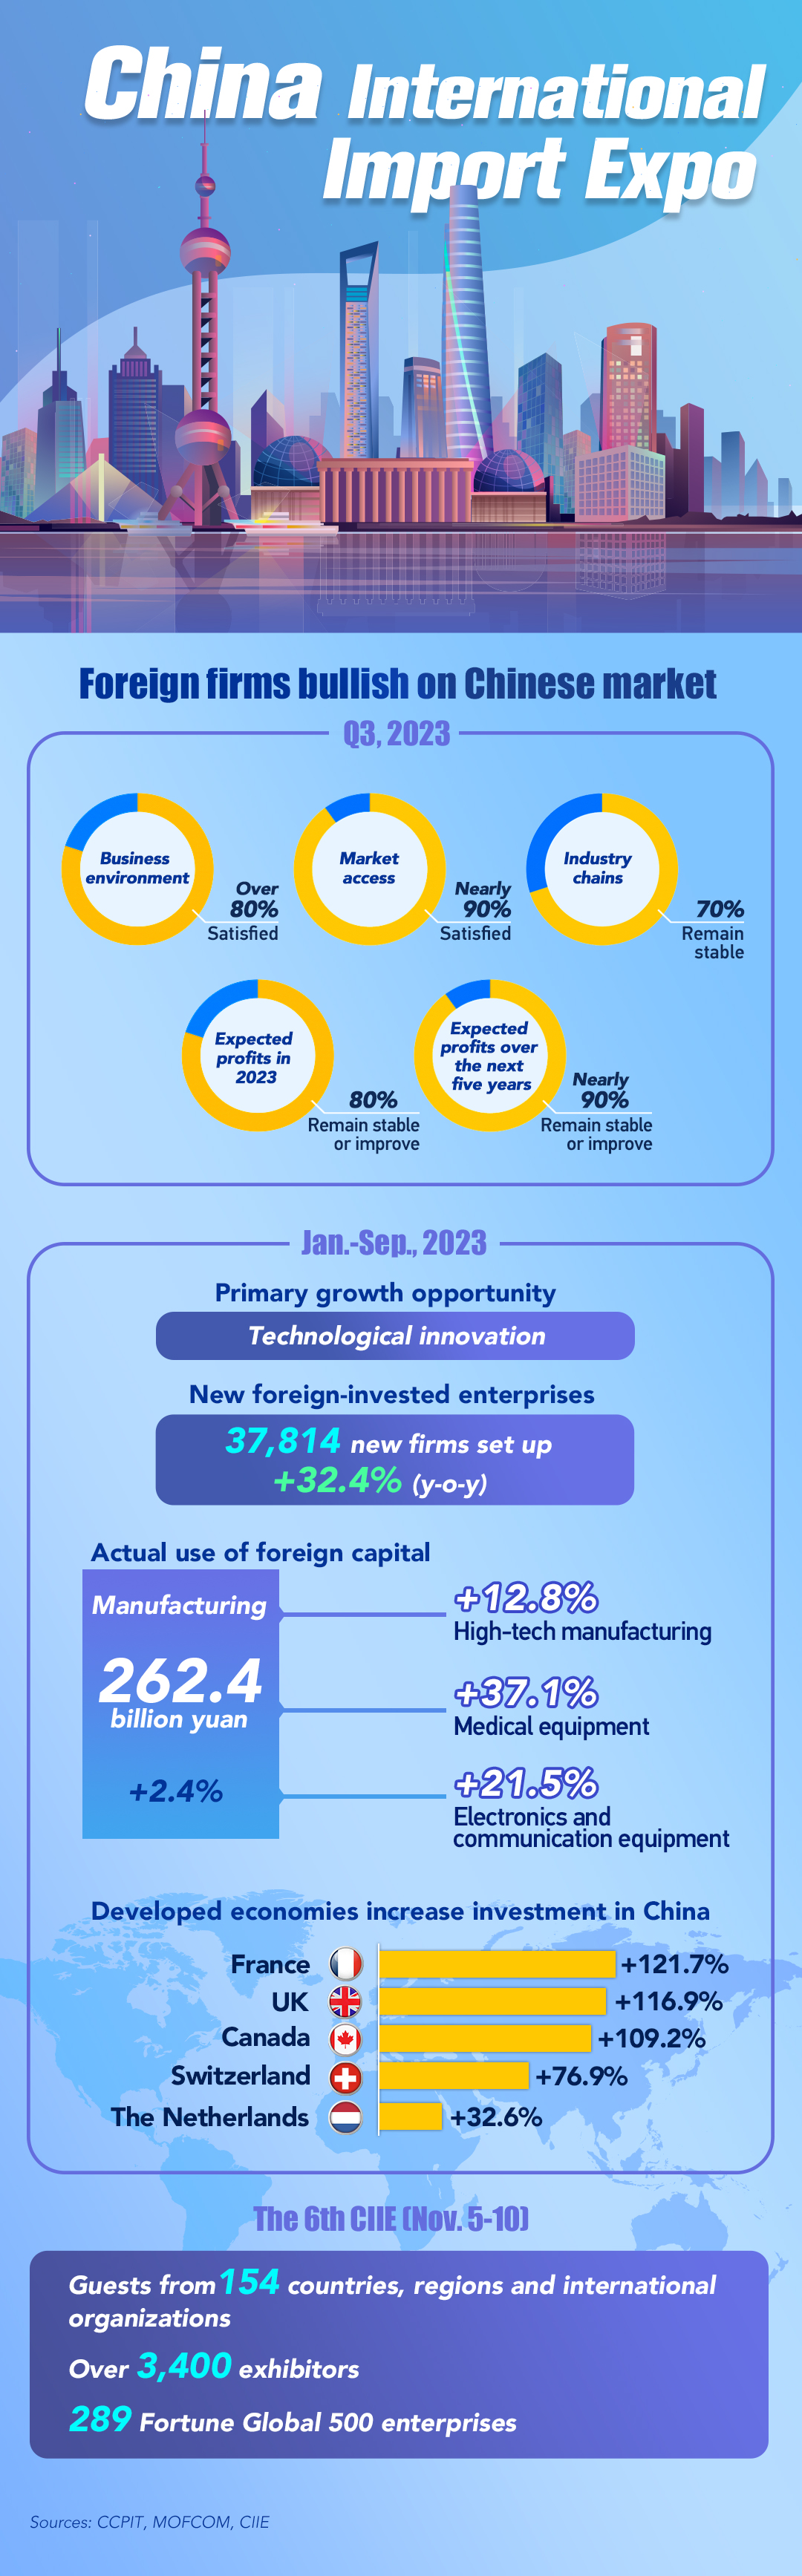 Graphics: Foreign firms bullish on Chinese market